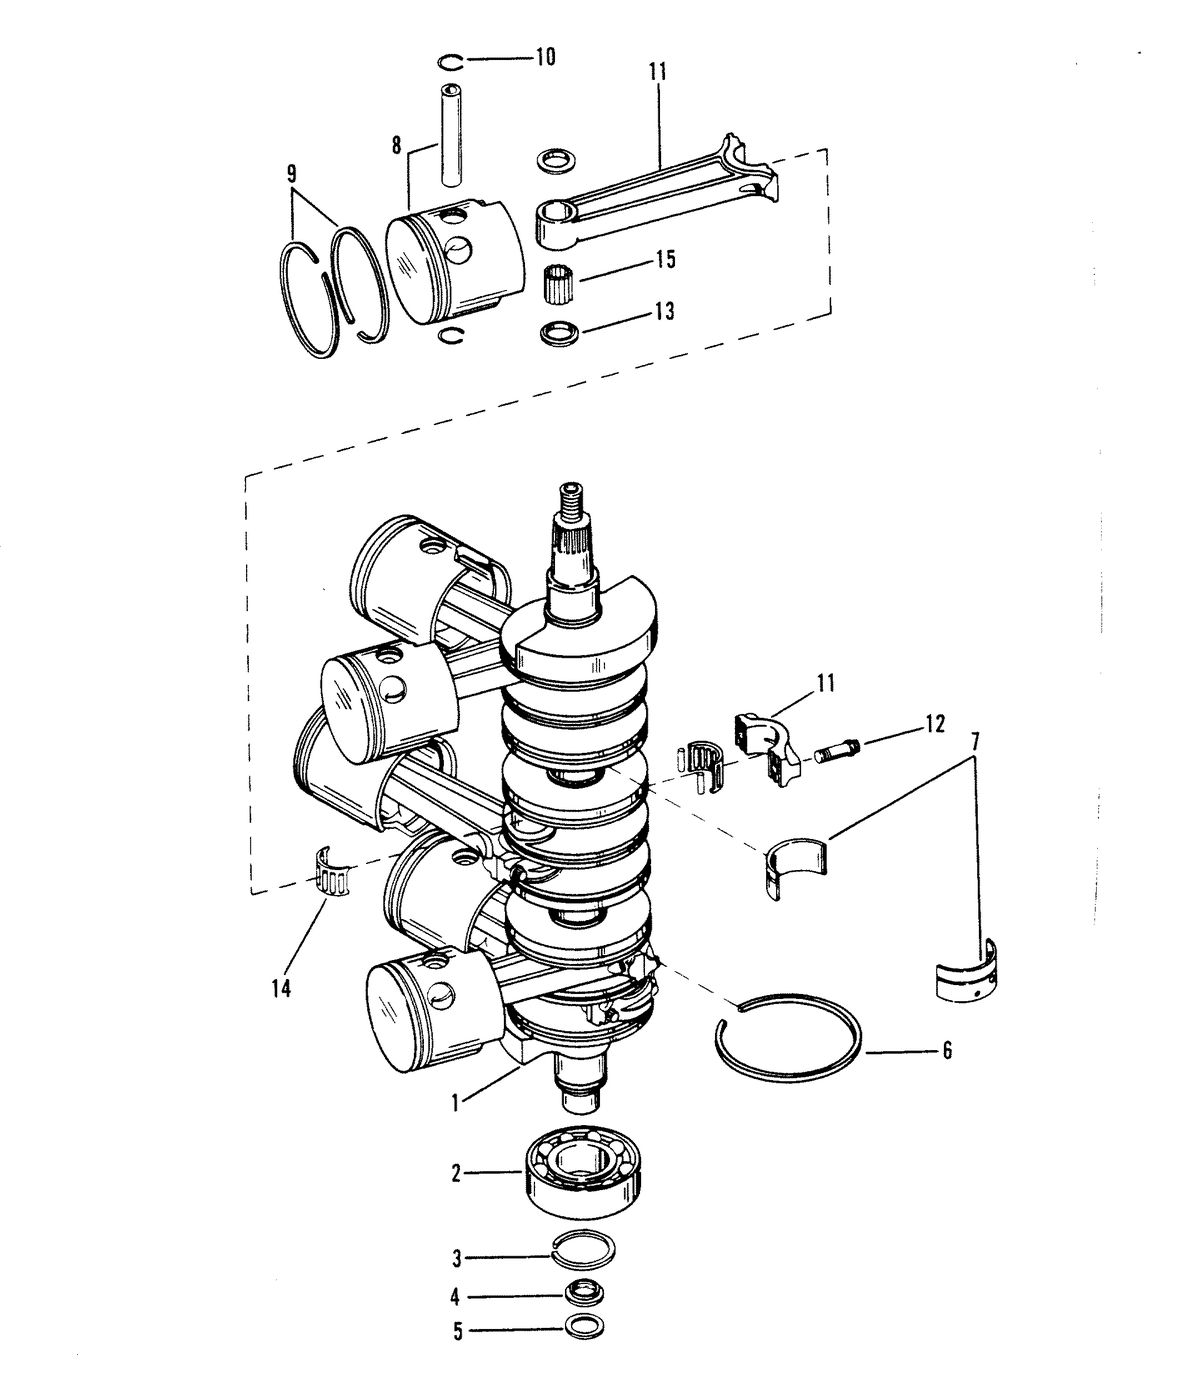 RACE OUTBOARD XR-2 / MAGNUM CRANKSHAFT, PISTONS AND CONNECTING RODS